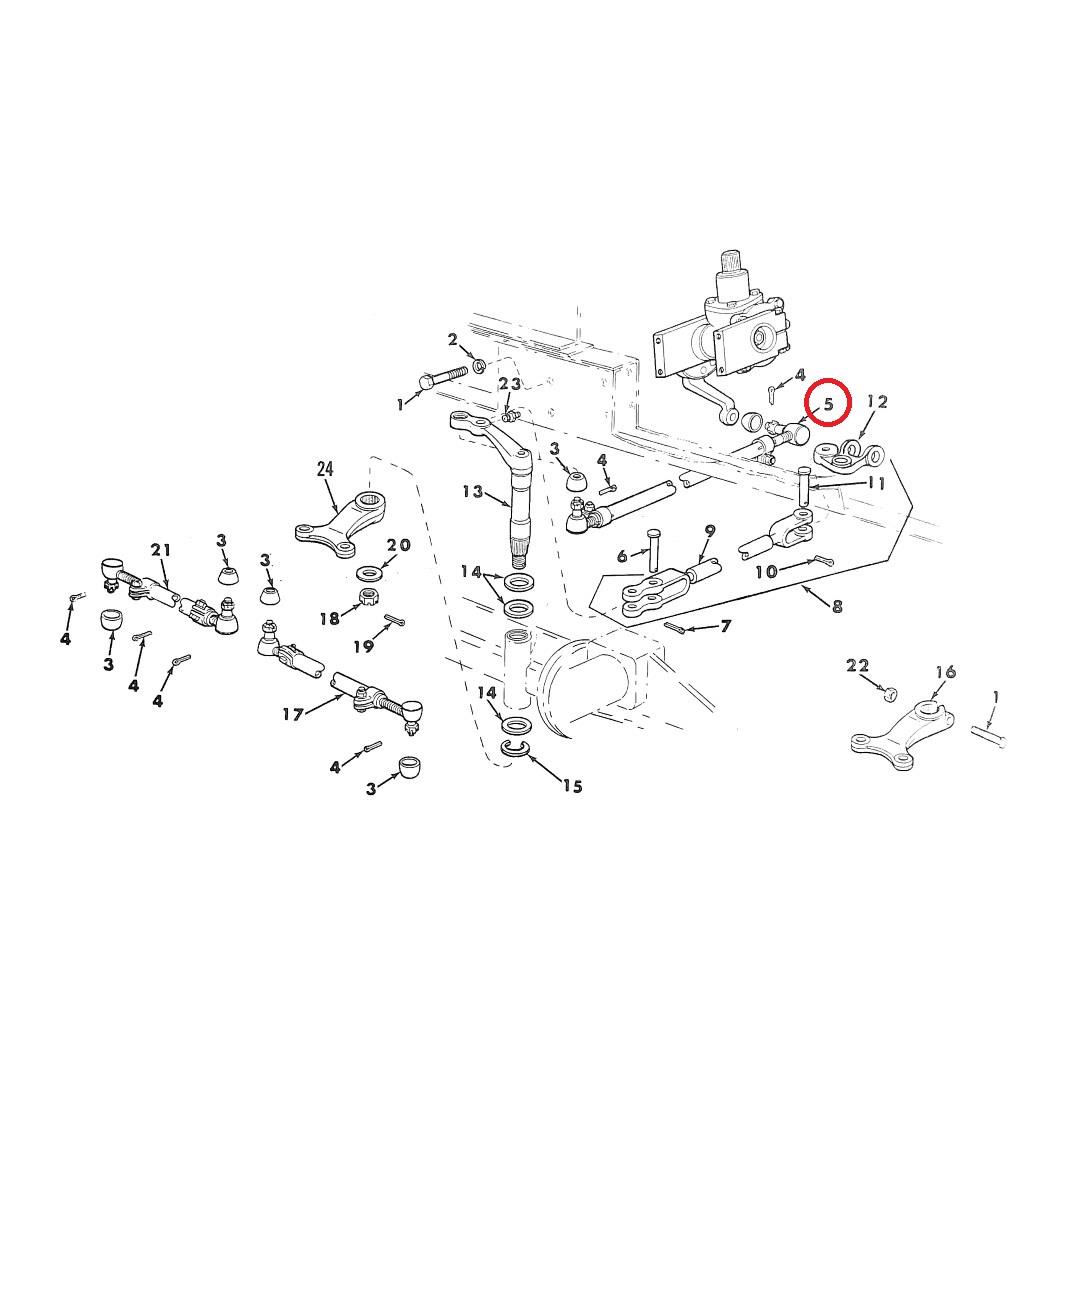 MU-189 | MU-189 Steering Linkage Drag Link Assembly with Small Sleeve Mule M274 Parts Diagram 2 (Large) - Copy.jpg